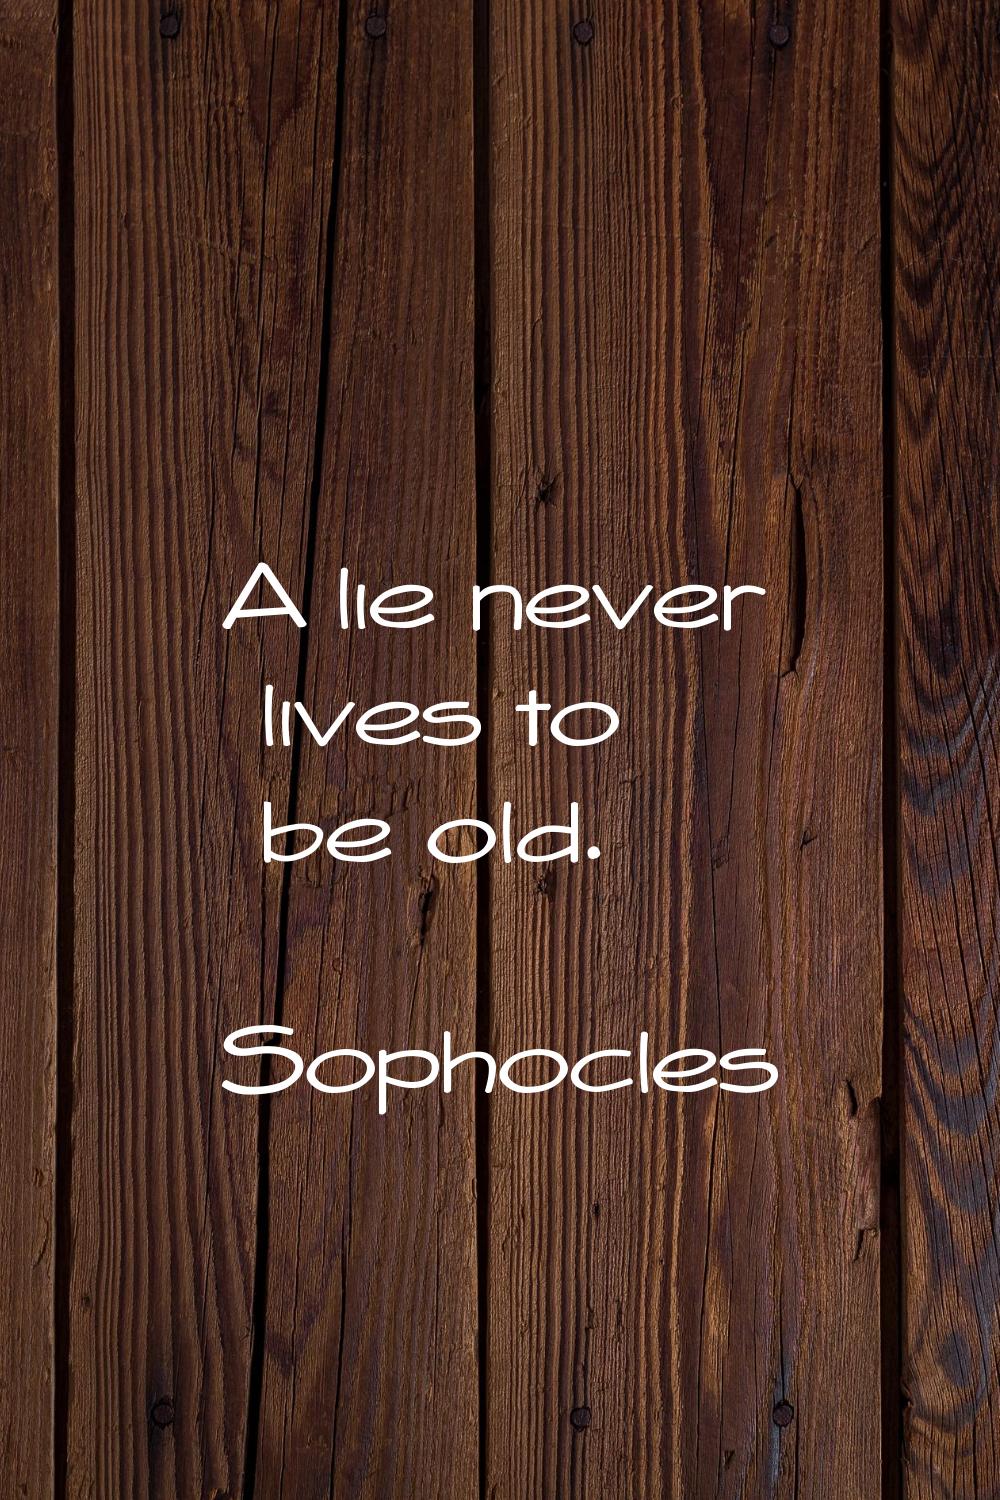 A lie never lives to be old.